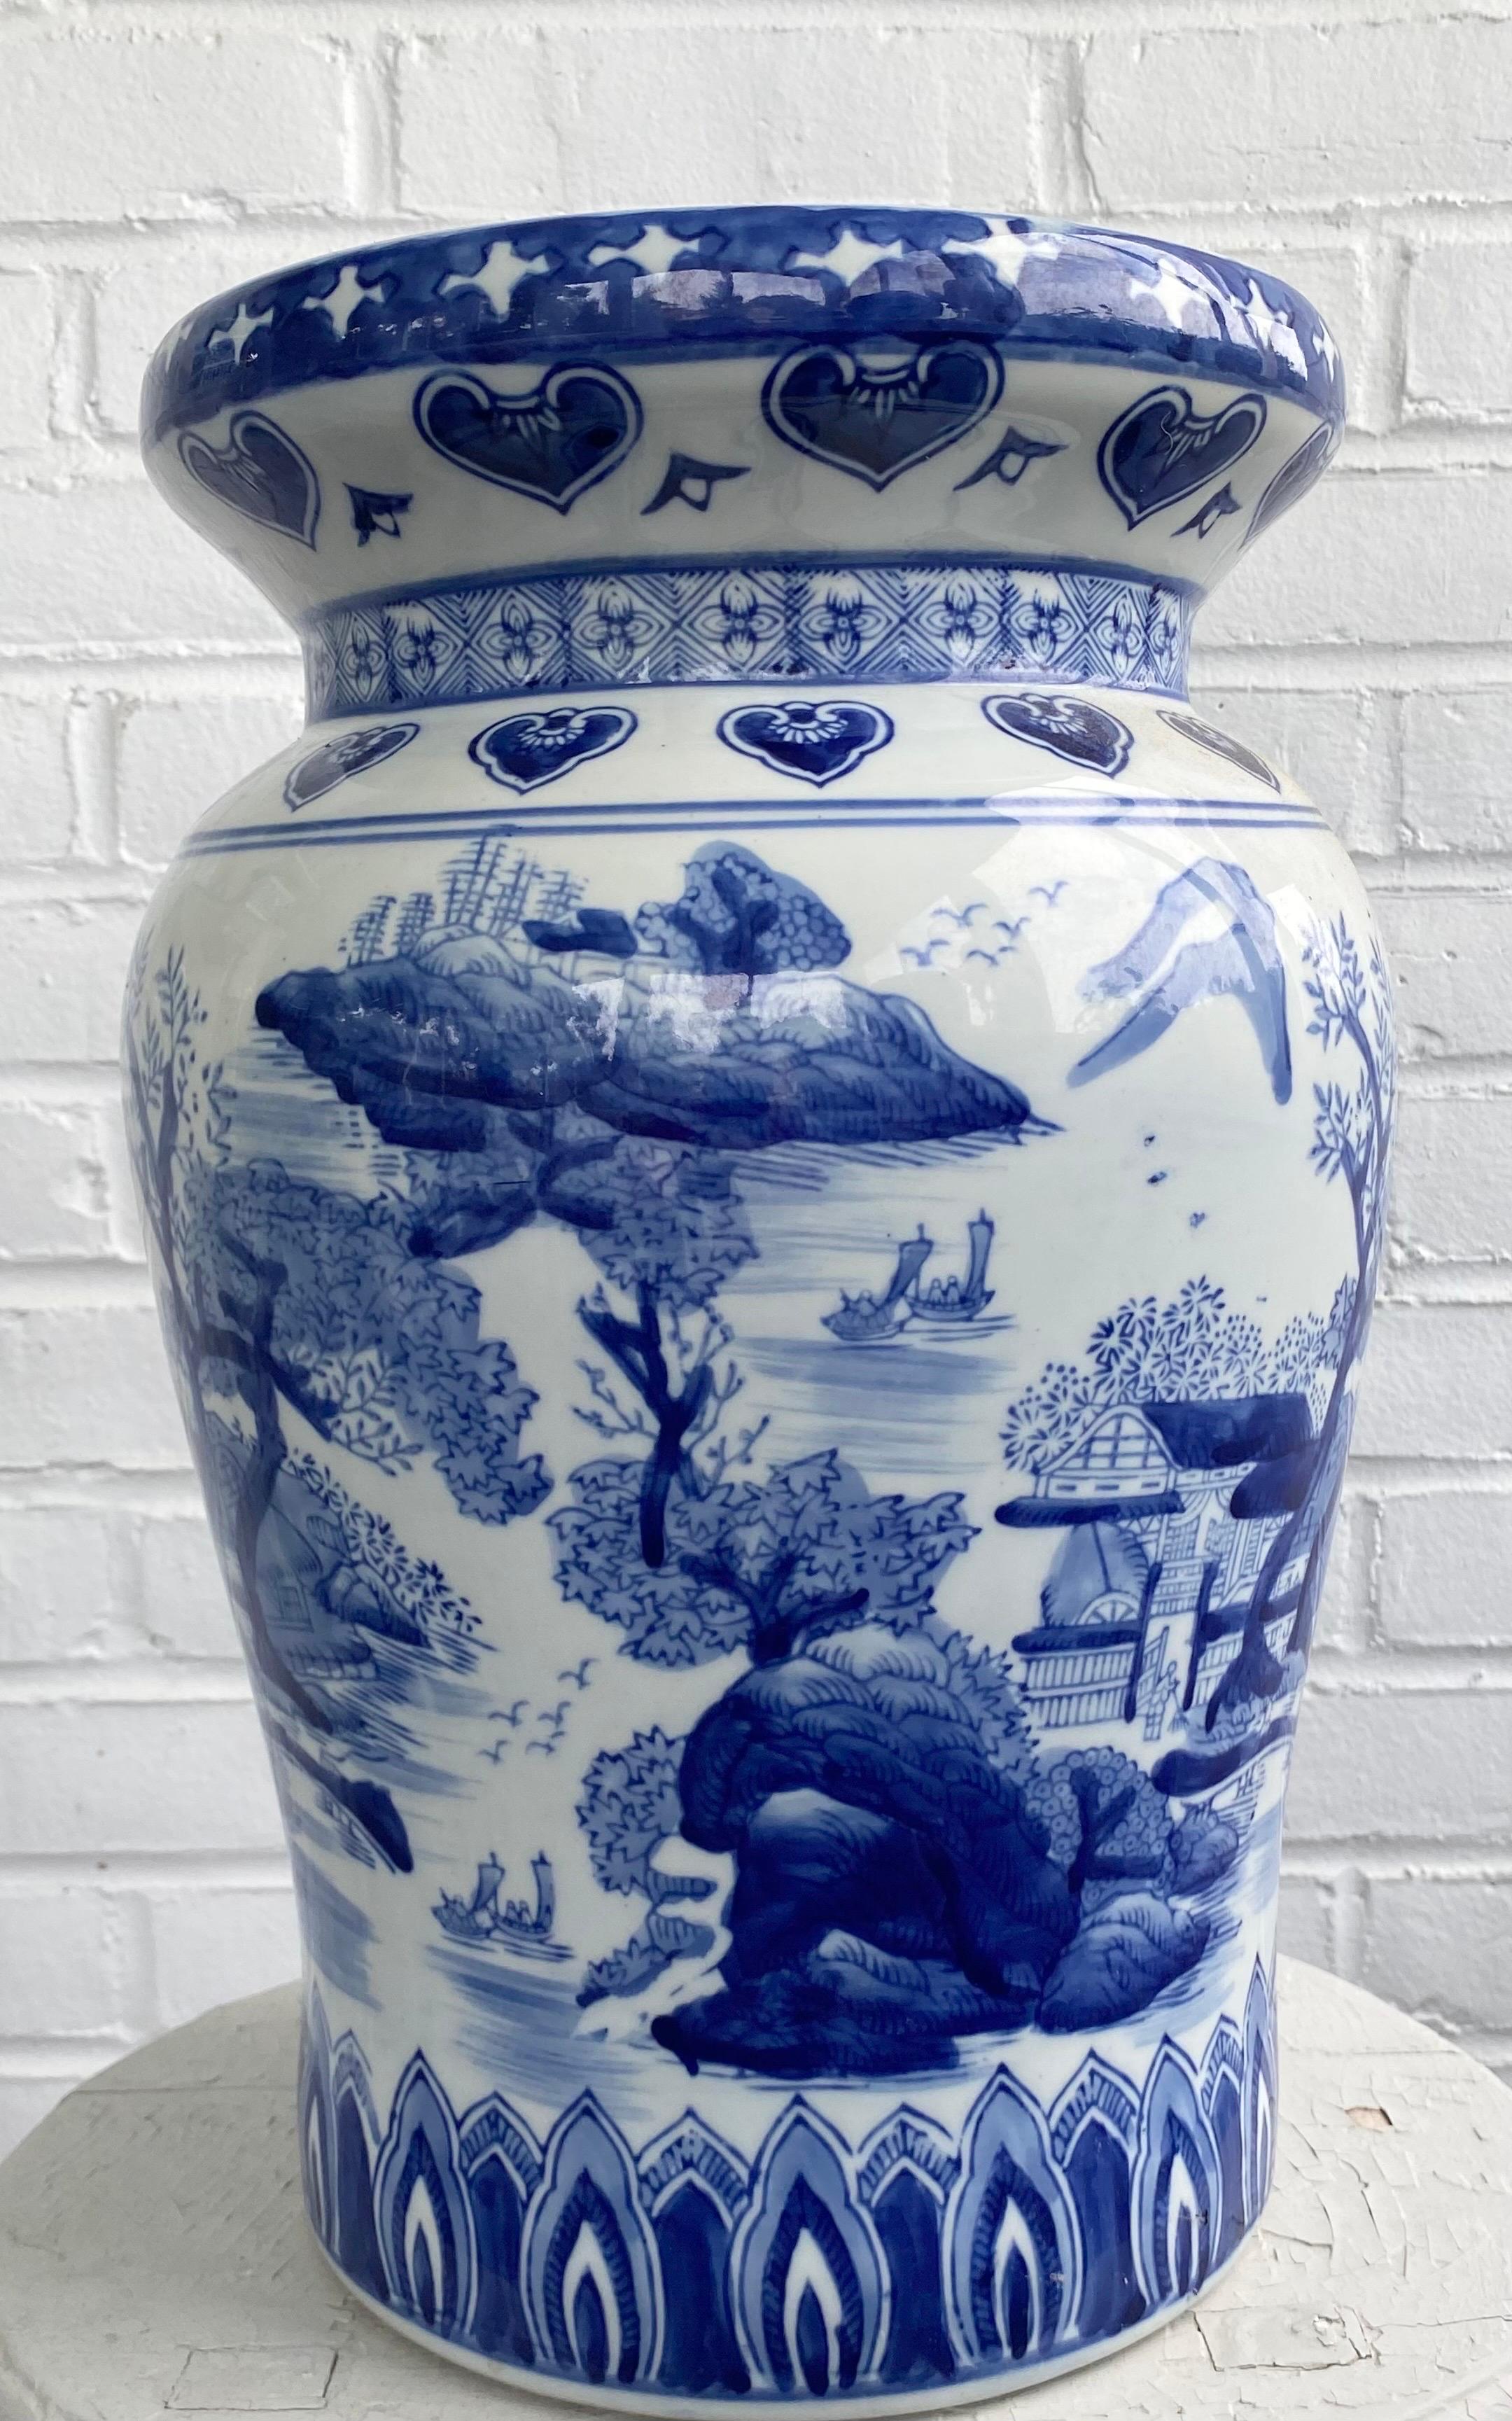 Ceramic Chinese Blue and White Garden Stool/Seat For Sale